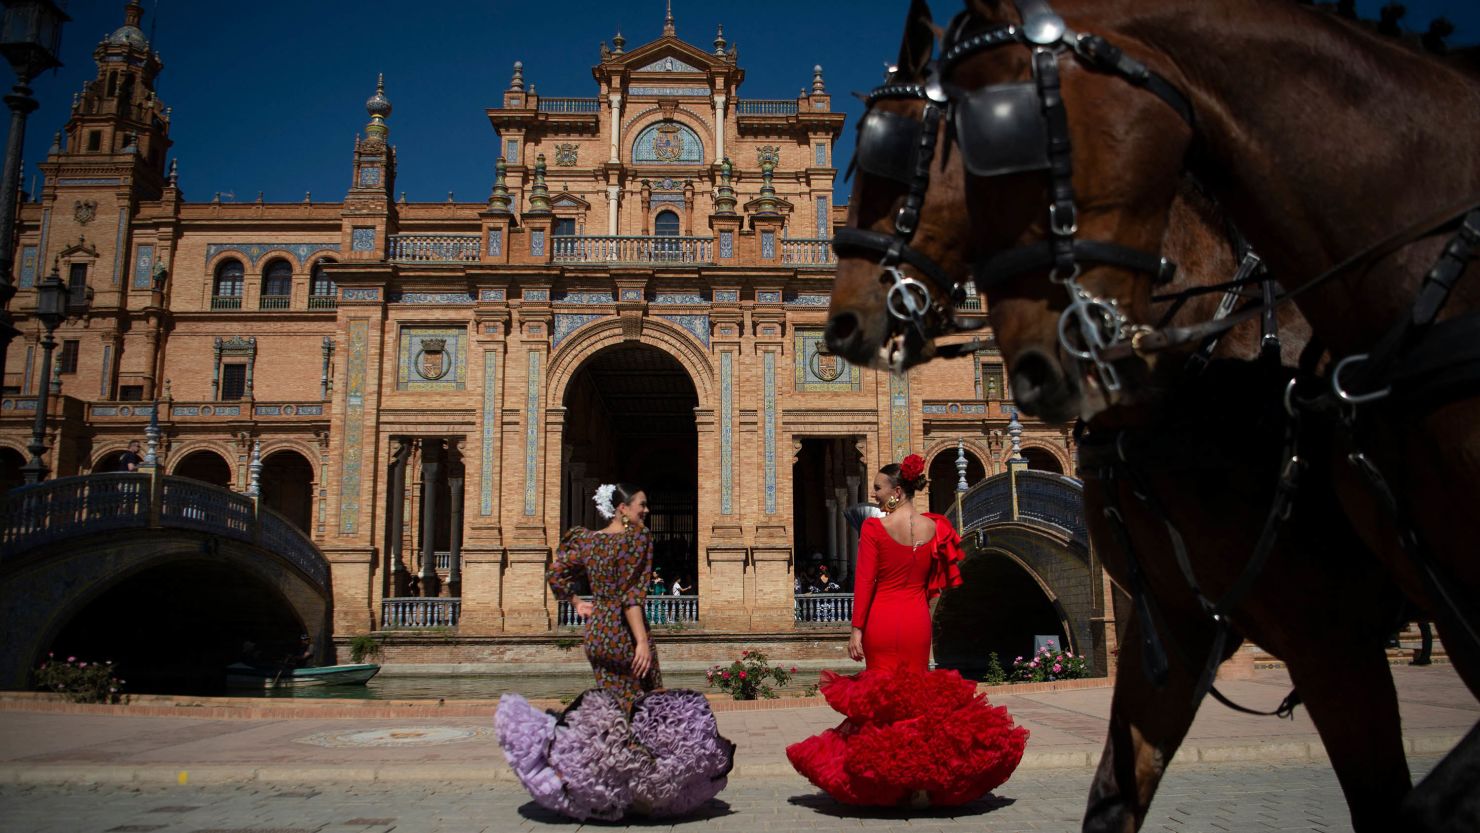 Women wearing traditional Andalusian dress stand in Seville's celebrated Plaza de Espana.